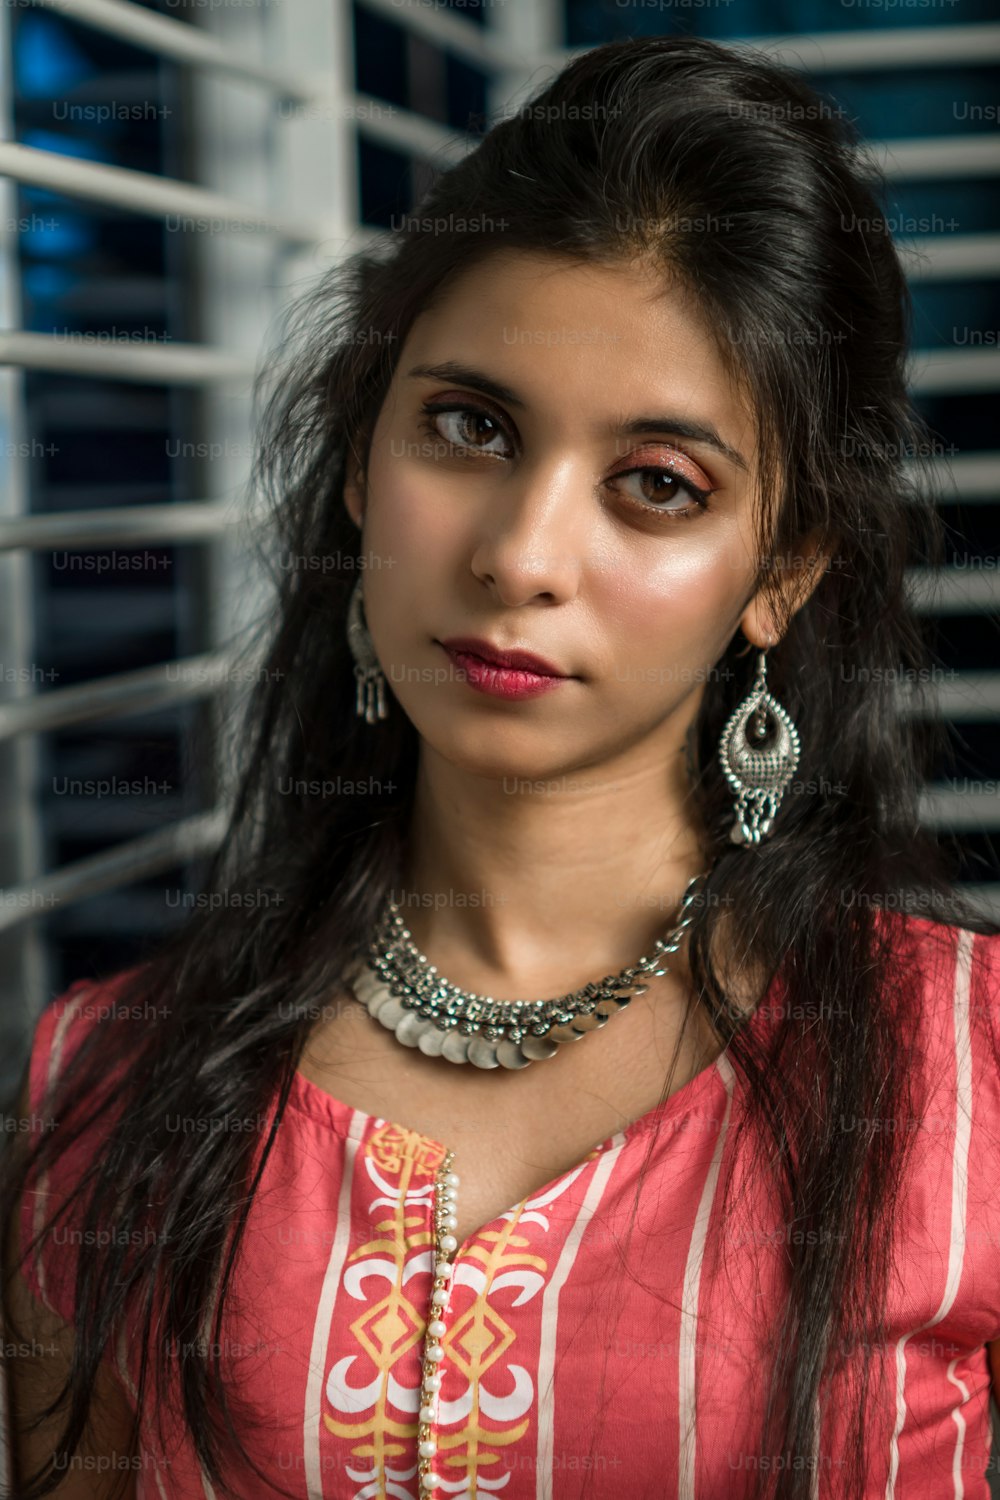 Portrait of hot indian woman with fashionable hairstyle poses. Woman posing in front of camera